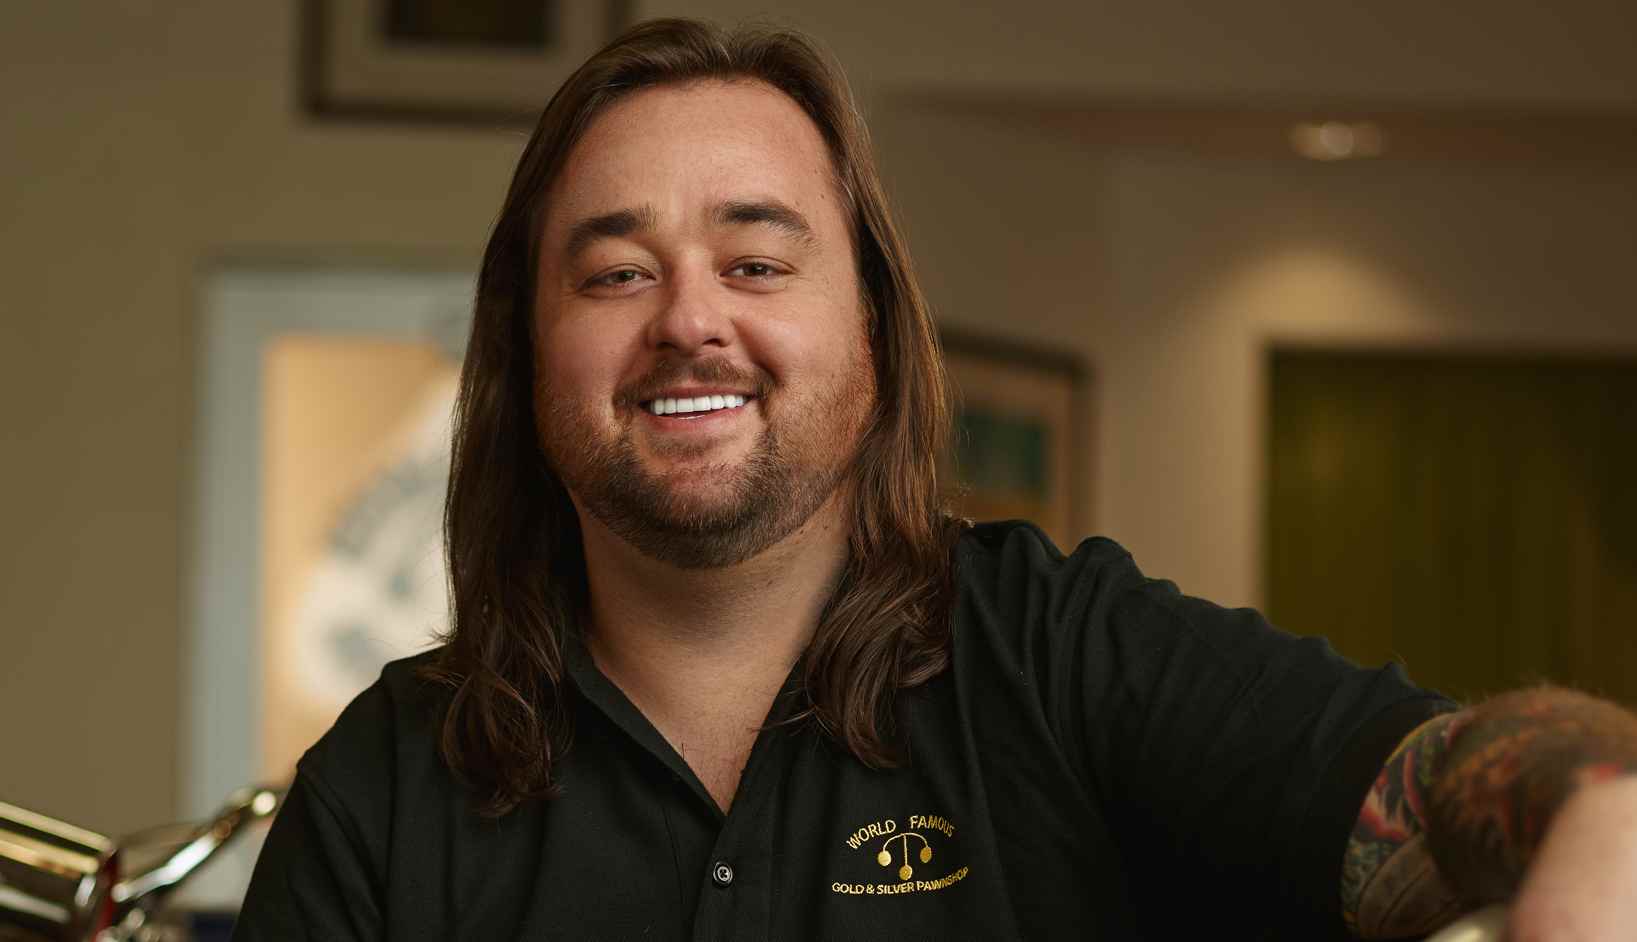 American businessman and reality television personality, Chumlee